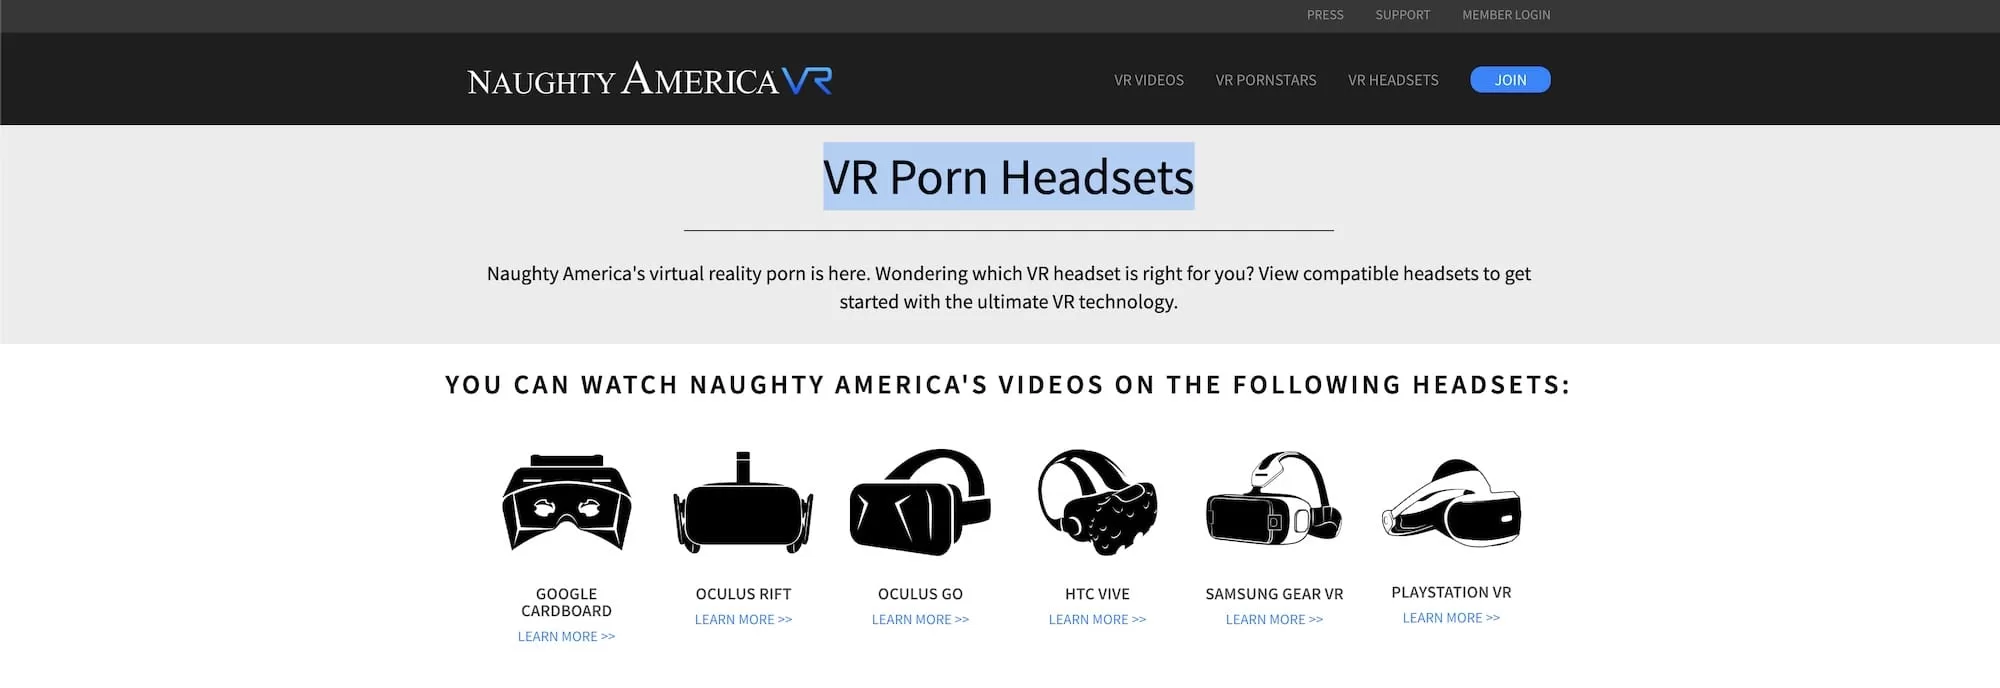 VR headsets supported by NaughtyAmericaVR